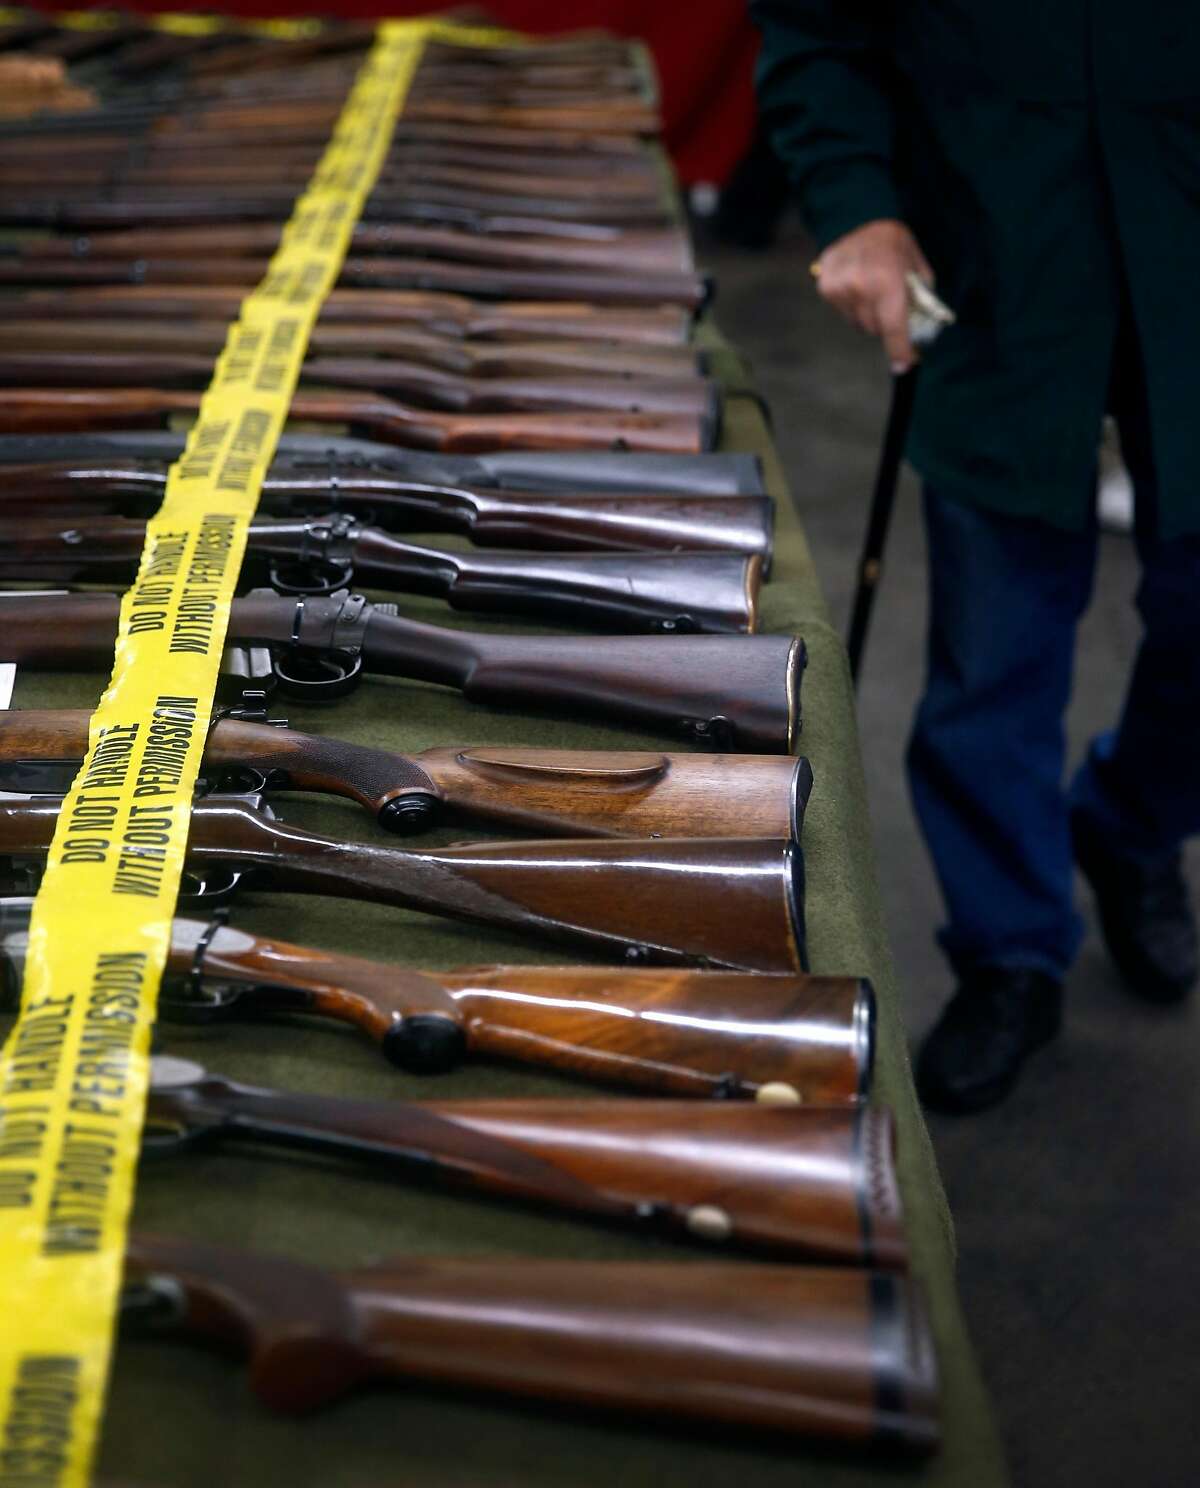 A man walks past an array of rifles at the Crossroads of the West gun show at the Cow Palace in Daly City, Calif. on Saturday, Jan. 9, 2016.